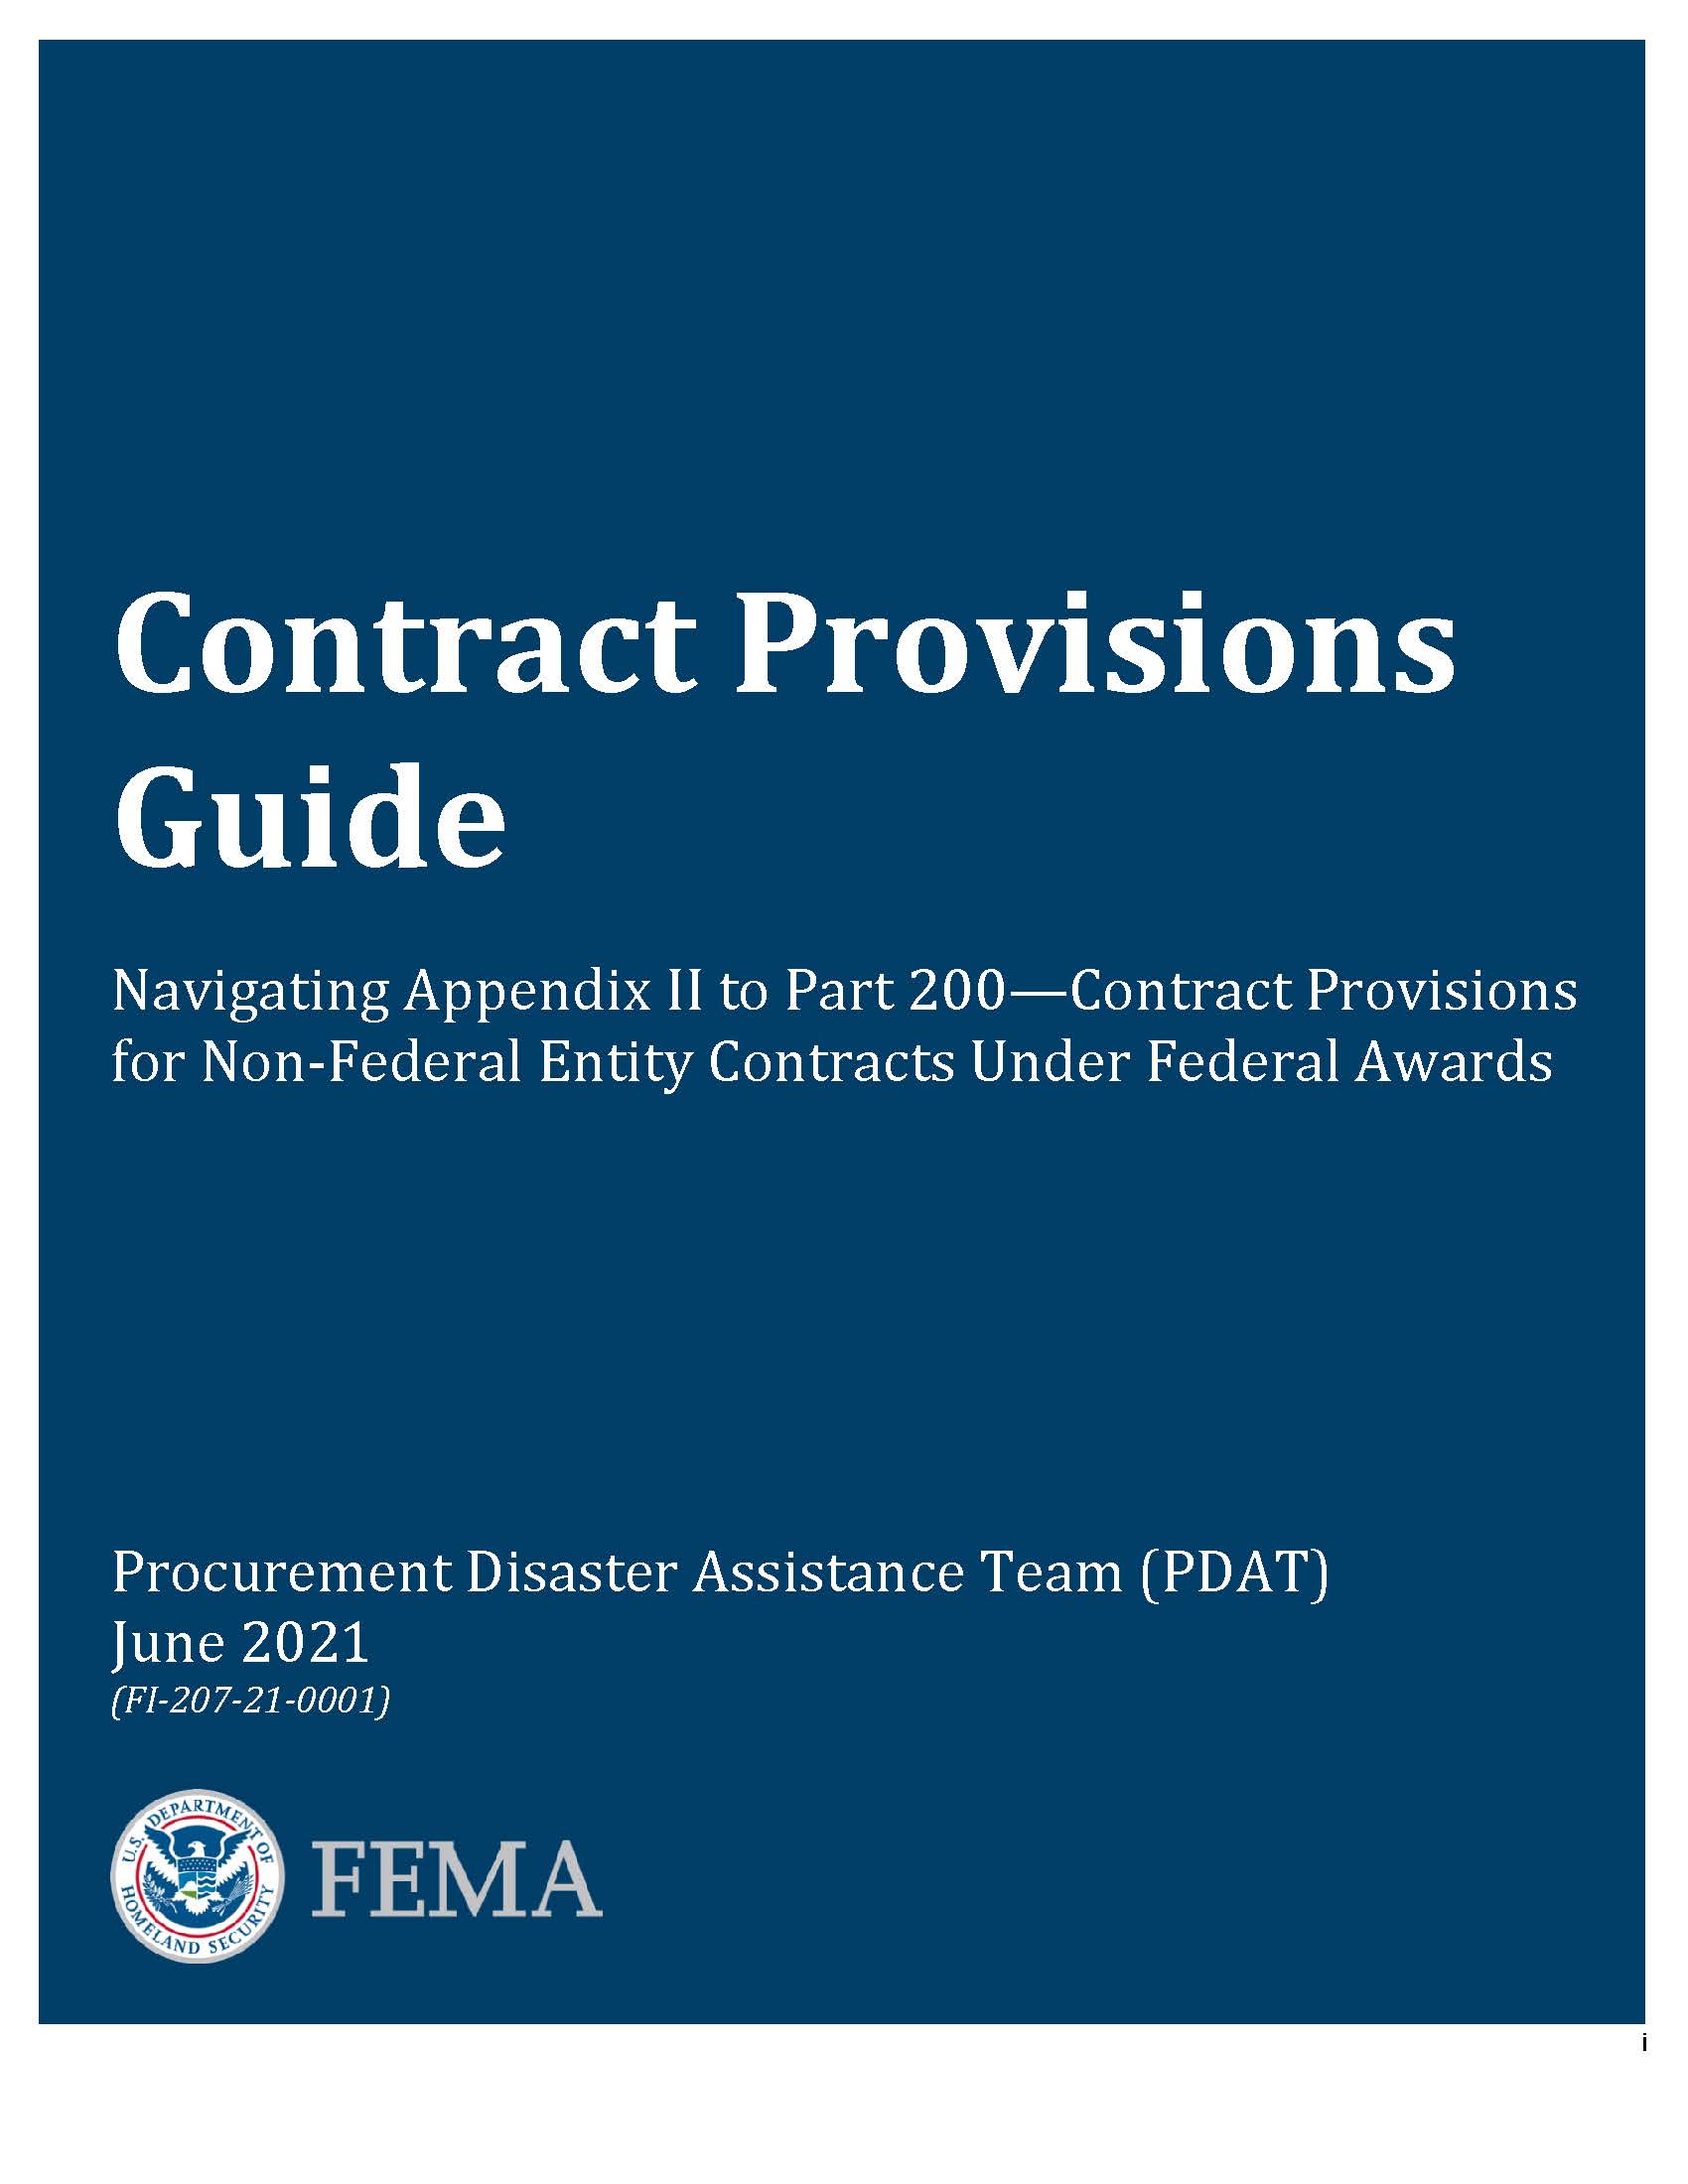 Contract Provisions Guide cover image